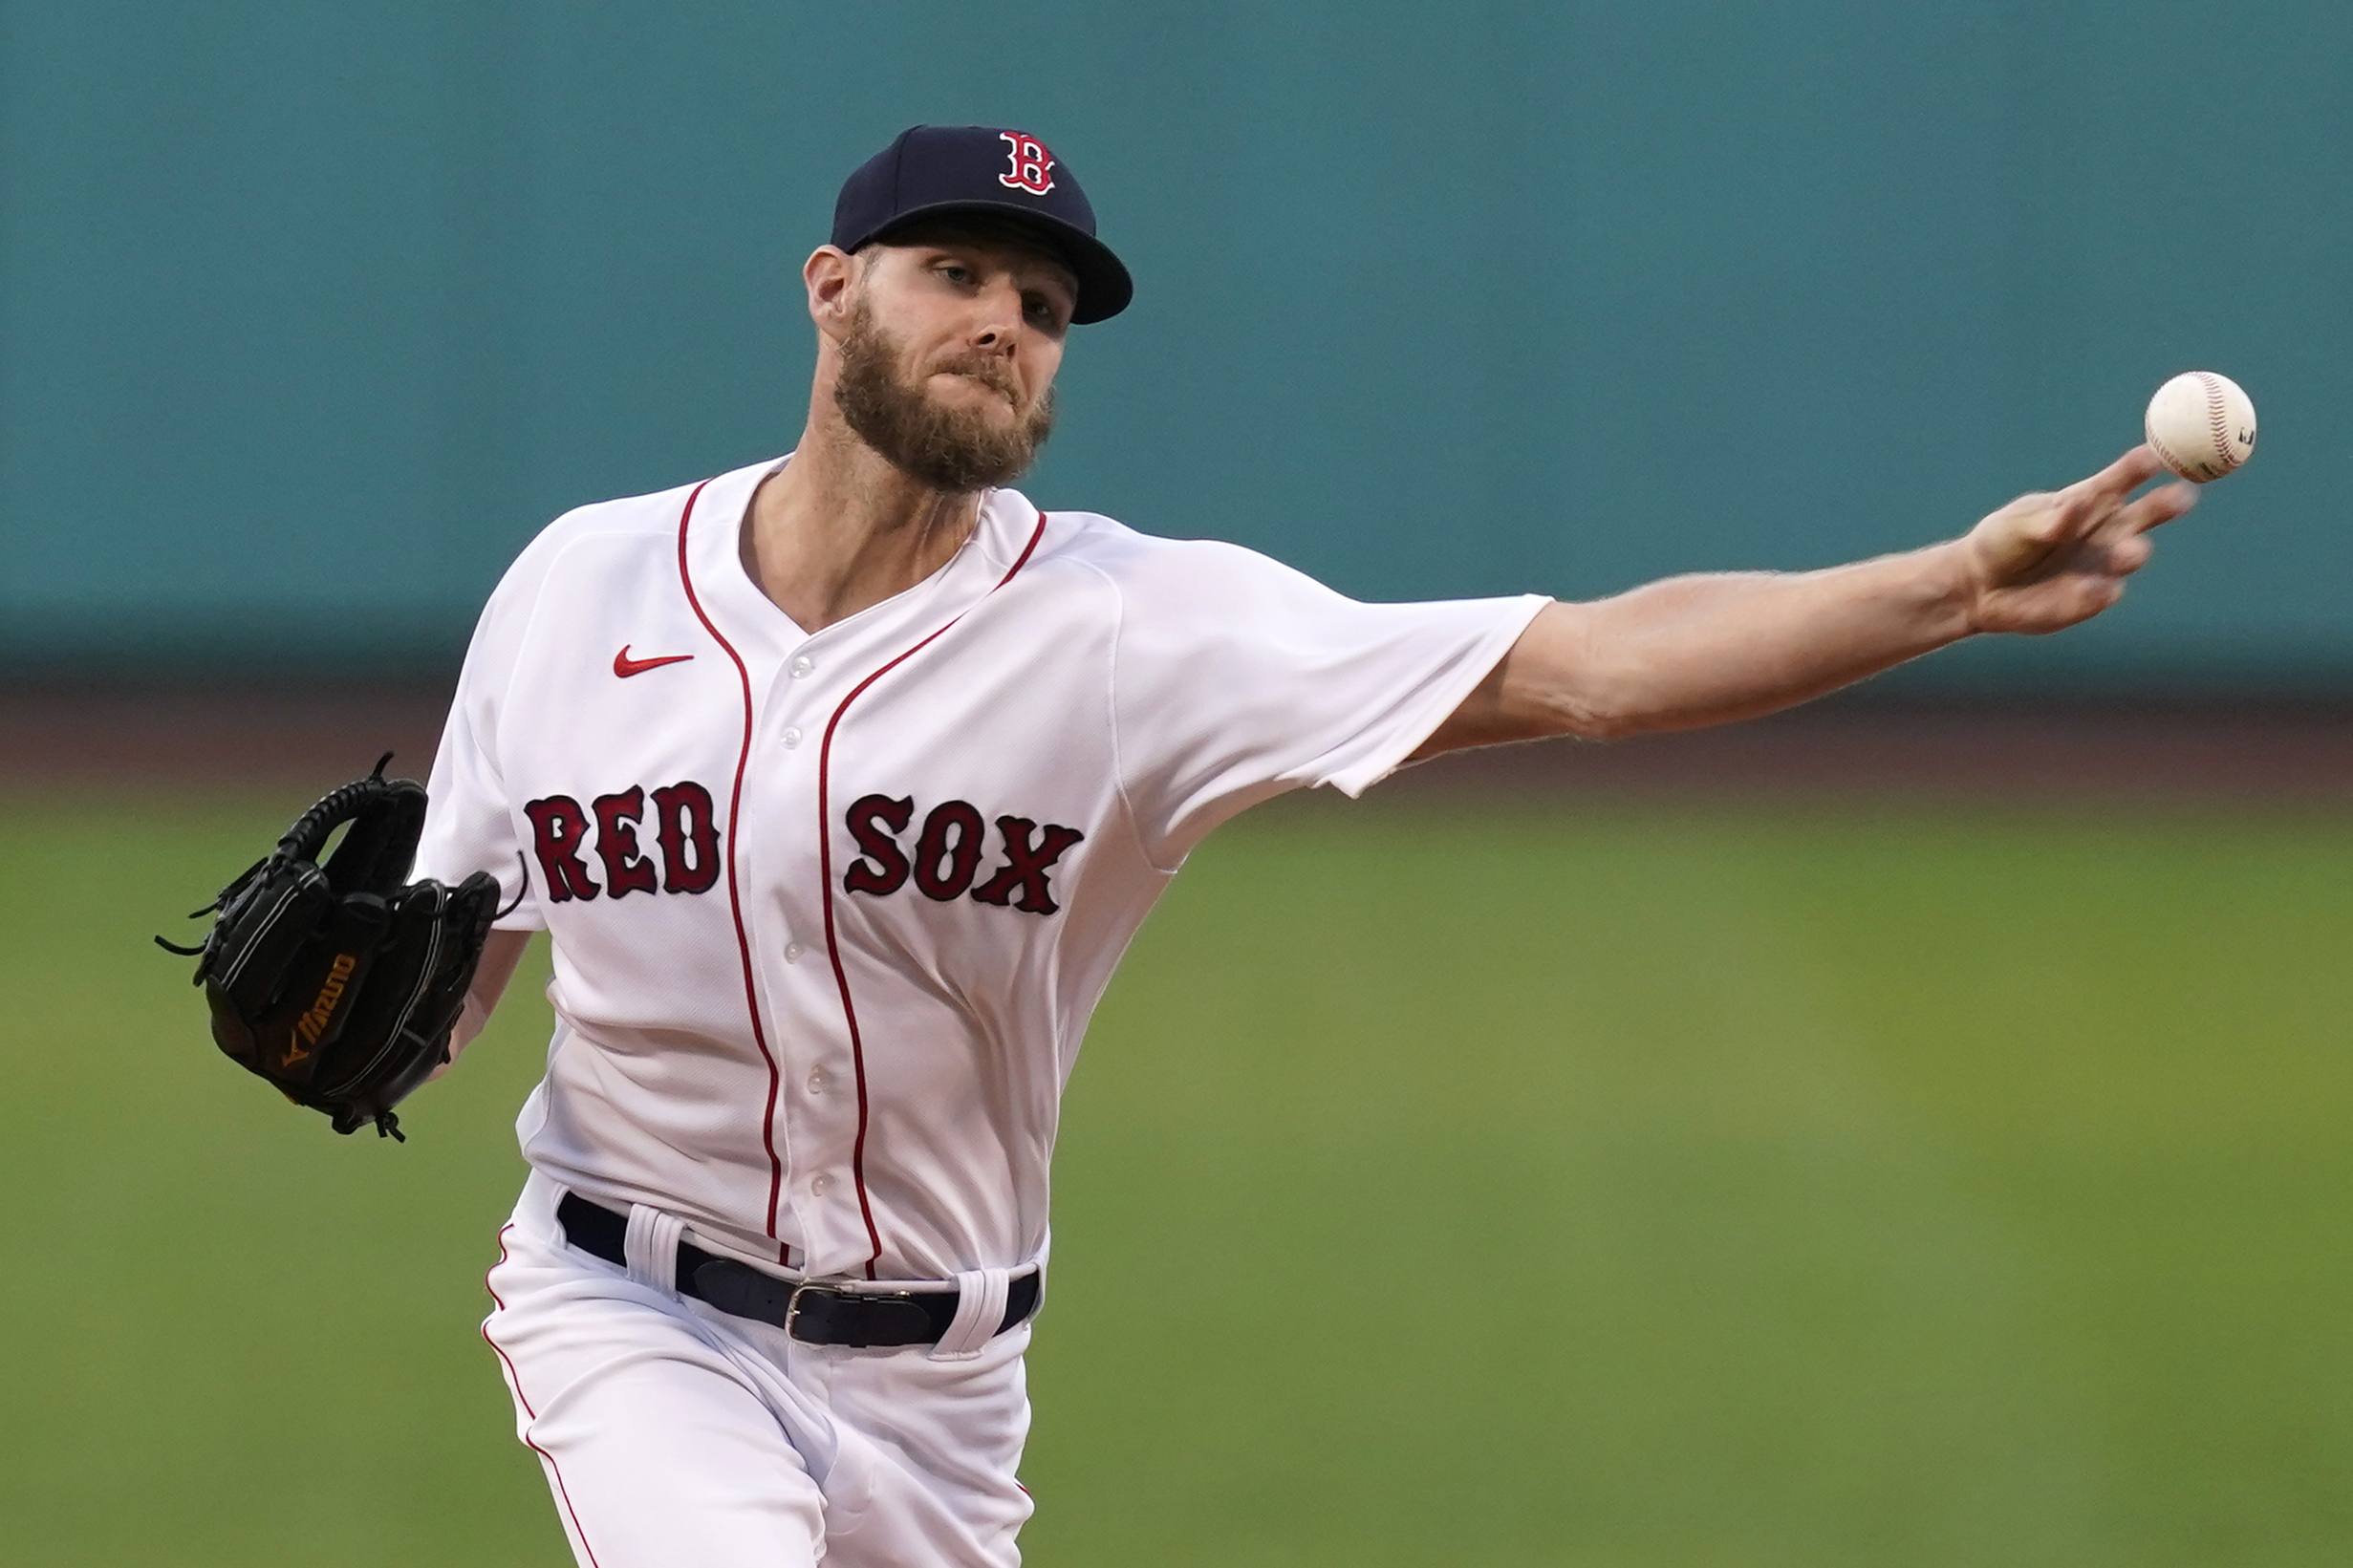 Report: Red Sox land White Sox ace Chris Sale